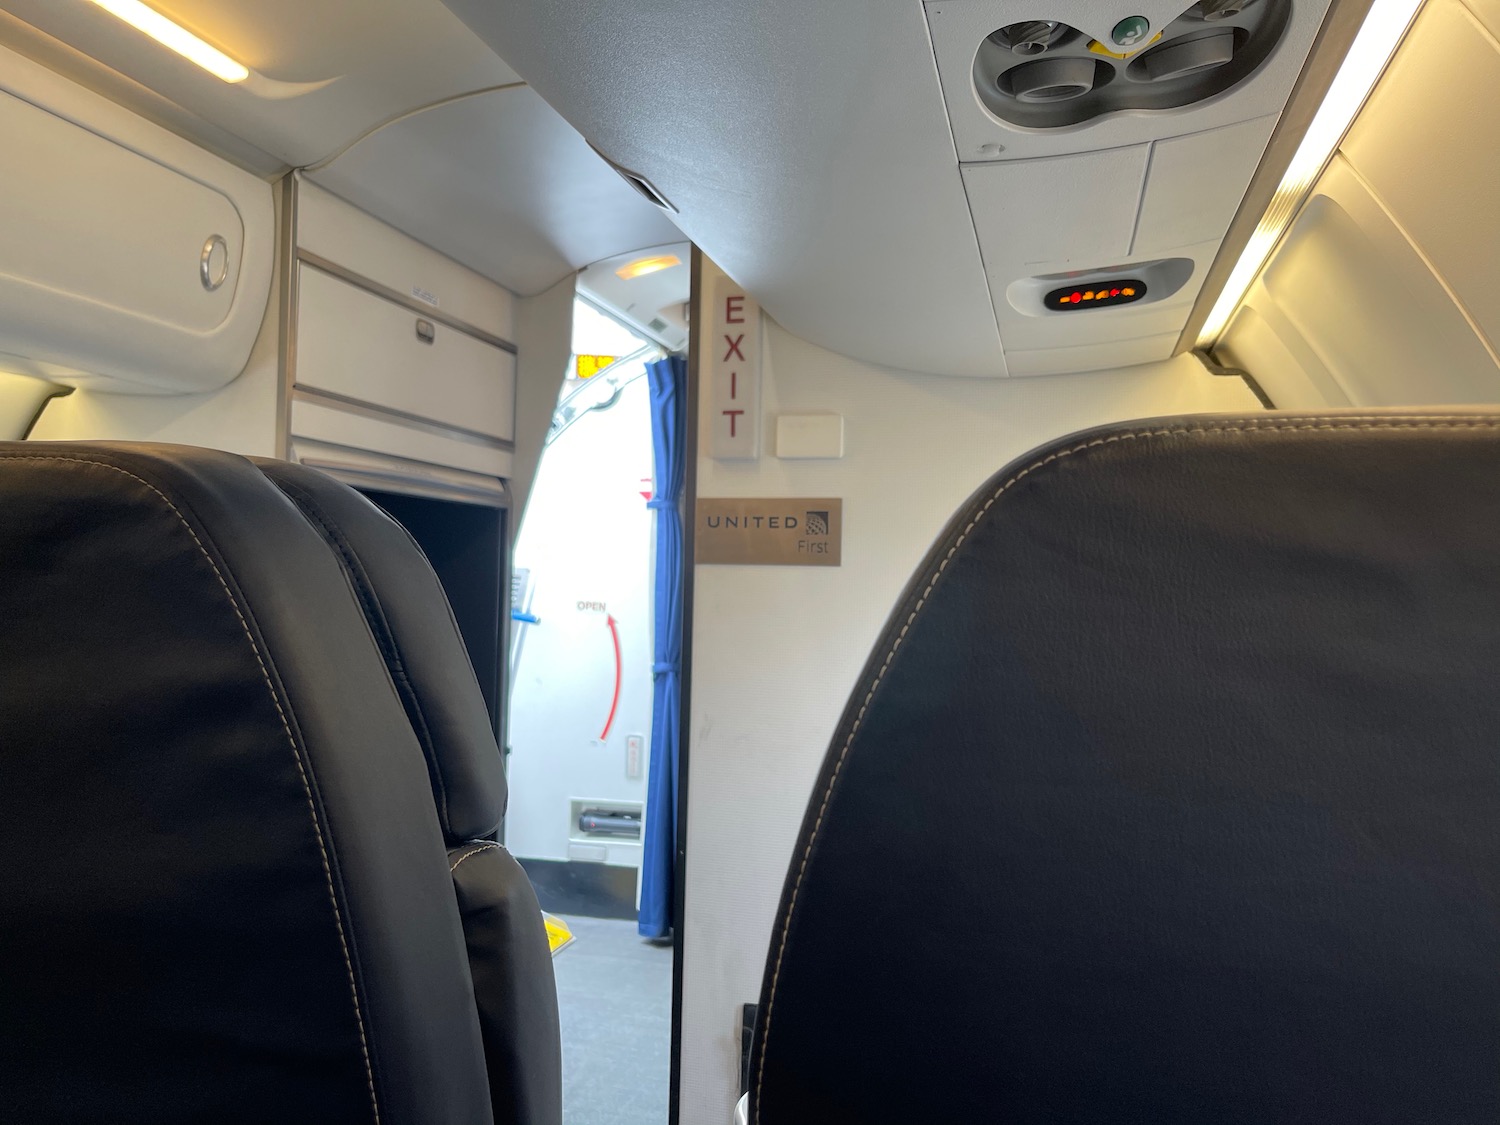 seats in an airplane with a sign and a door